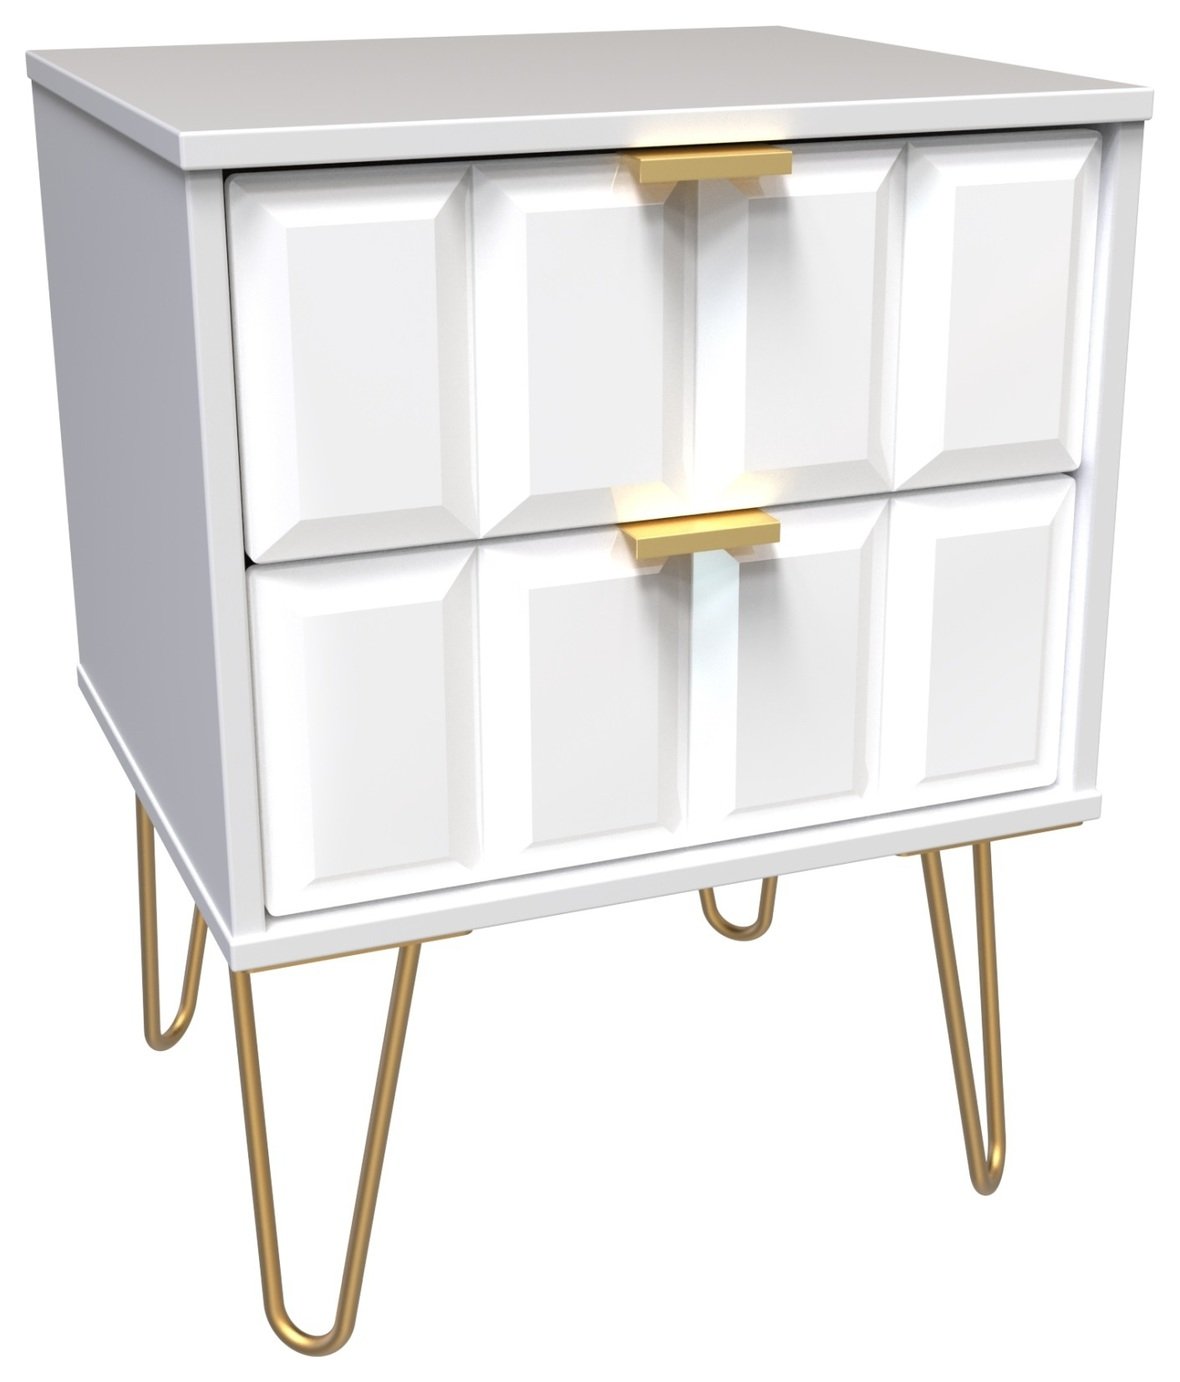 Calvello 2 Drawer Charge Bedside Table - White